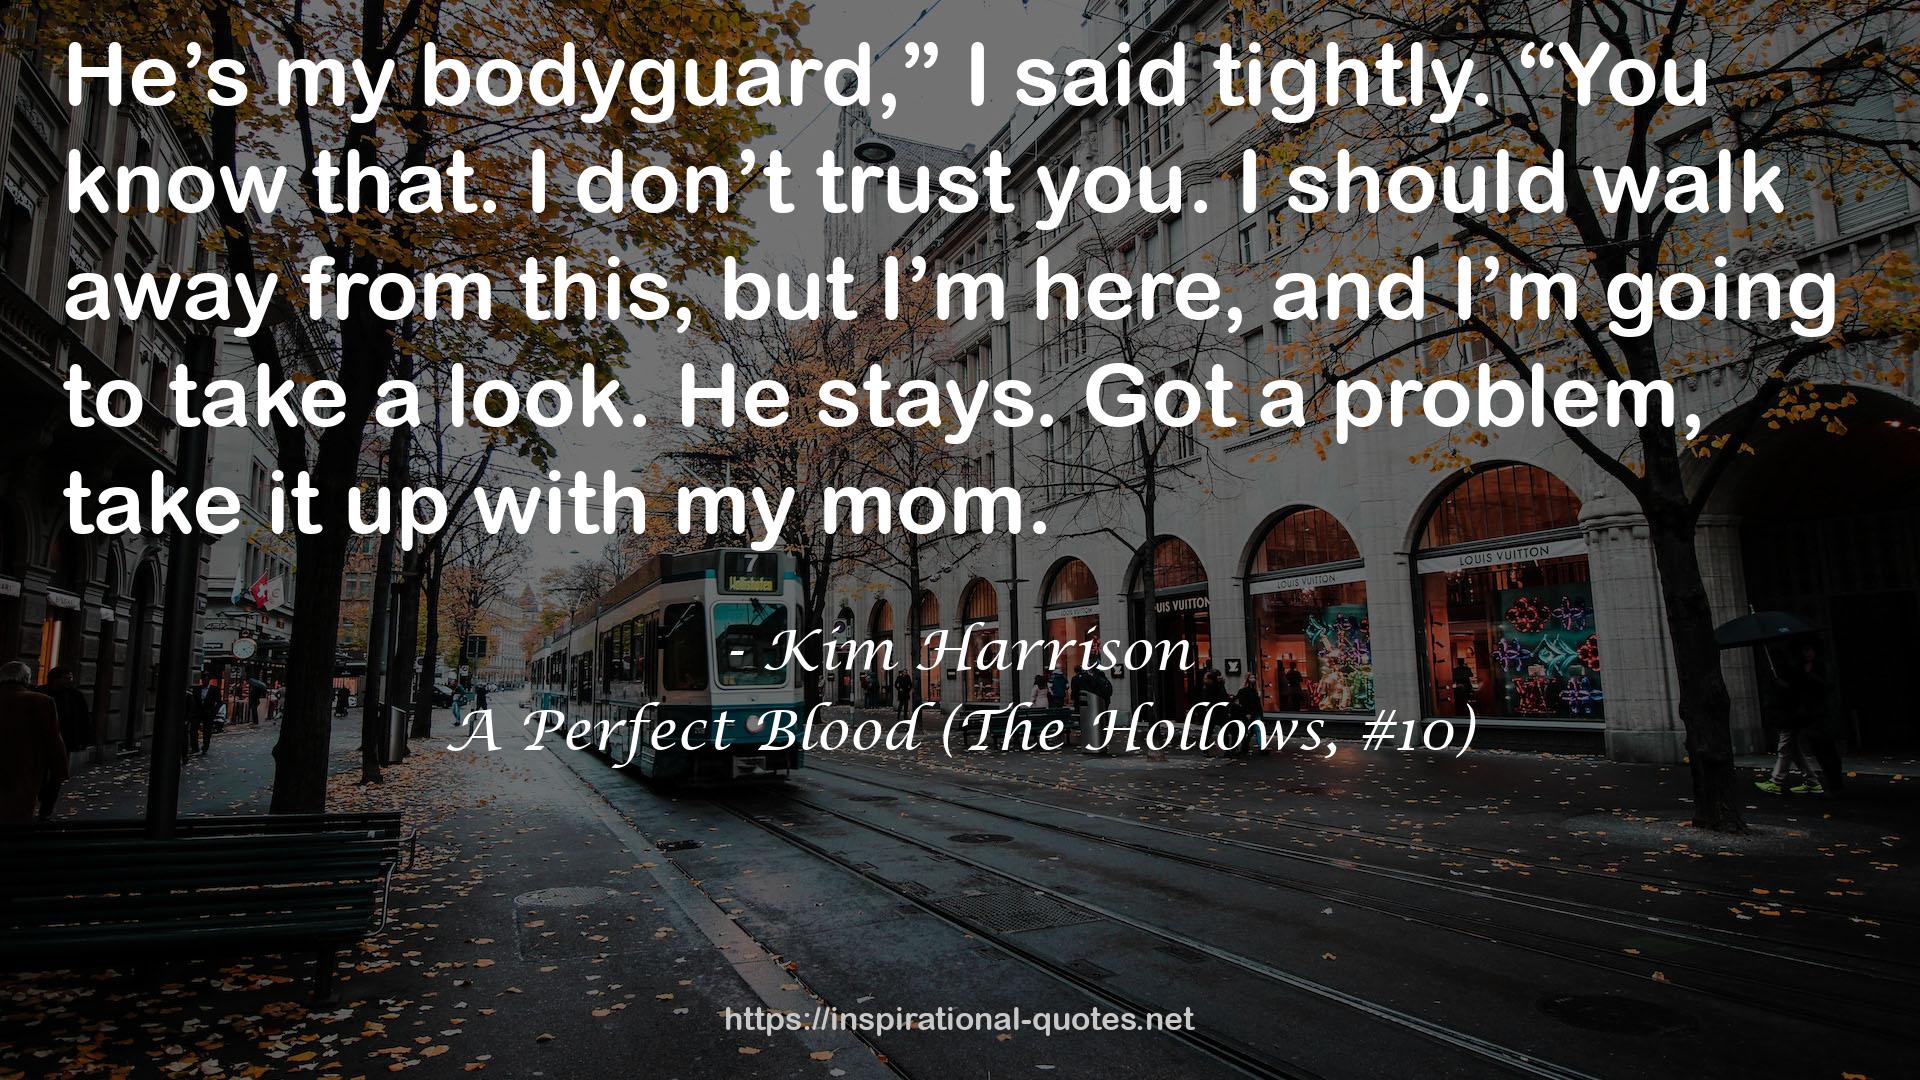 A Perfect Blood (The Hollows, #10) QUOTES